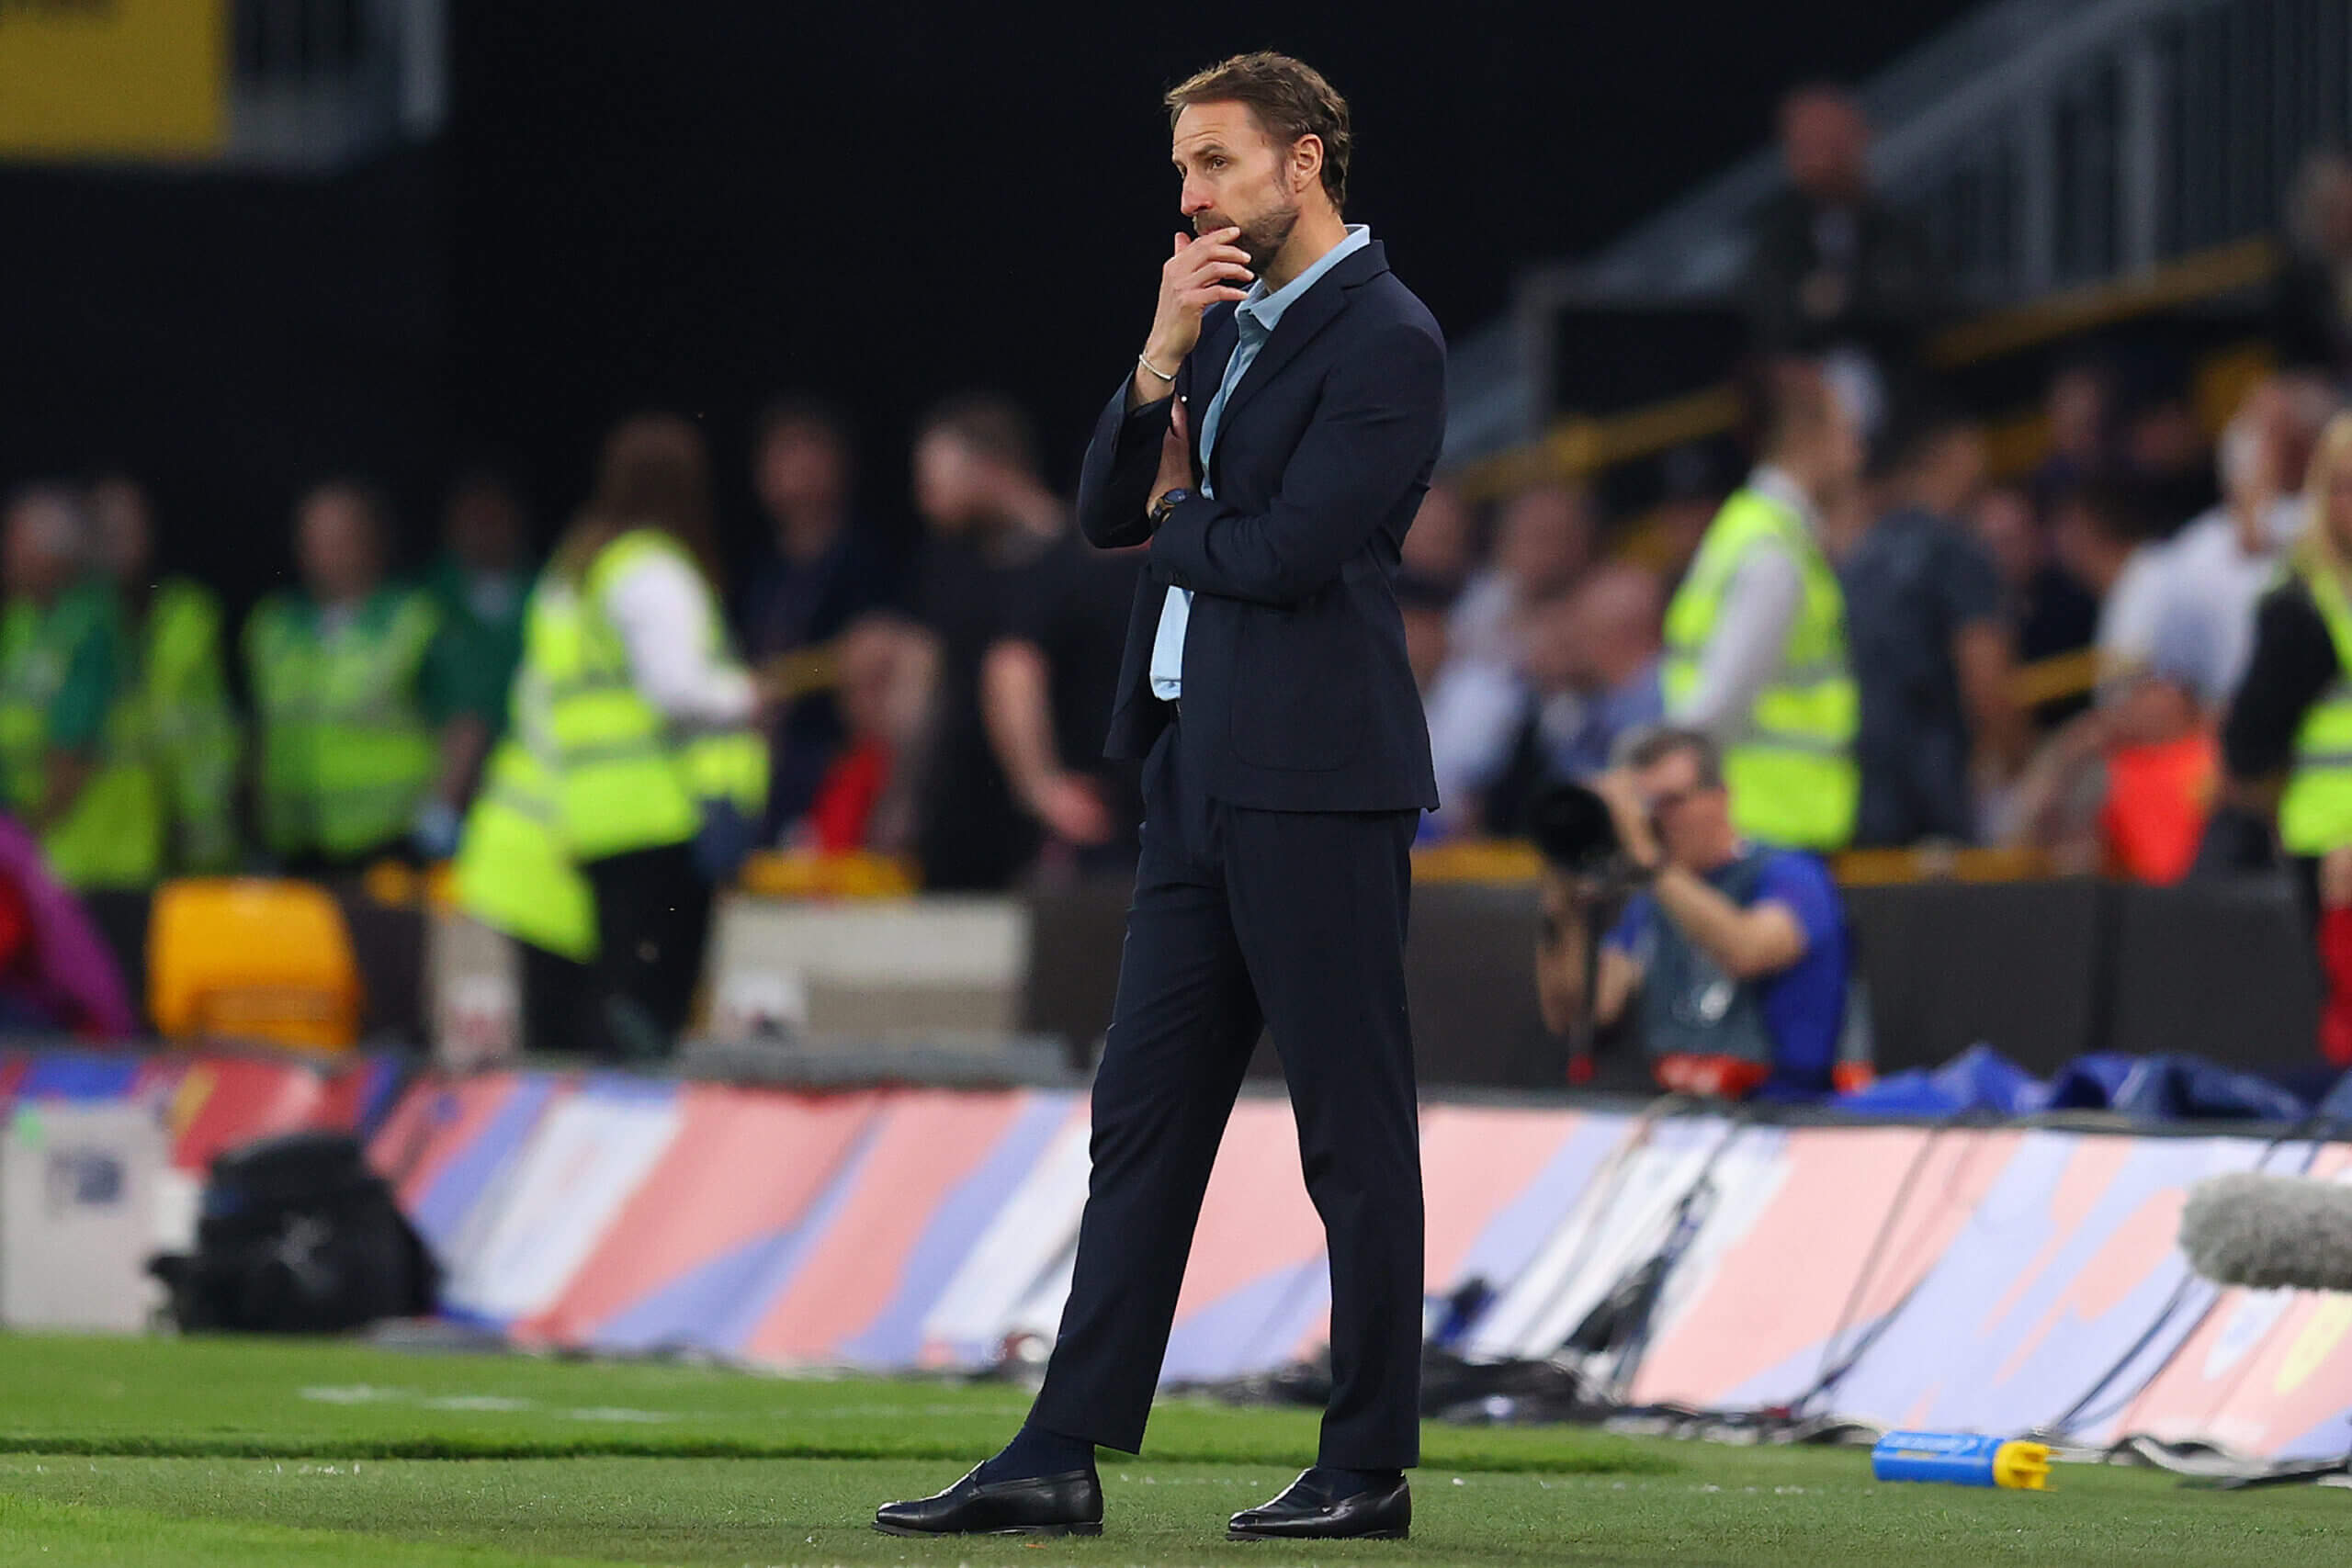 The key question for Gareth Southgate today: Who can make the step down to international level?